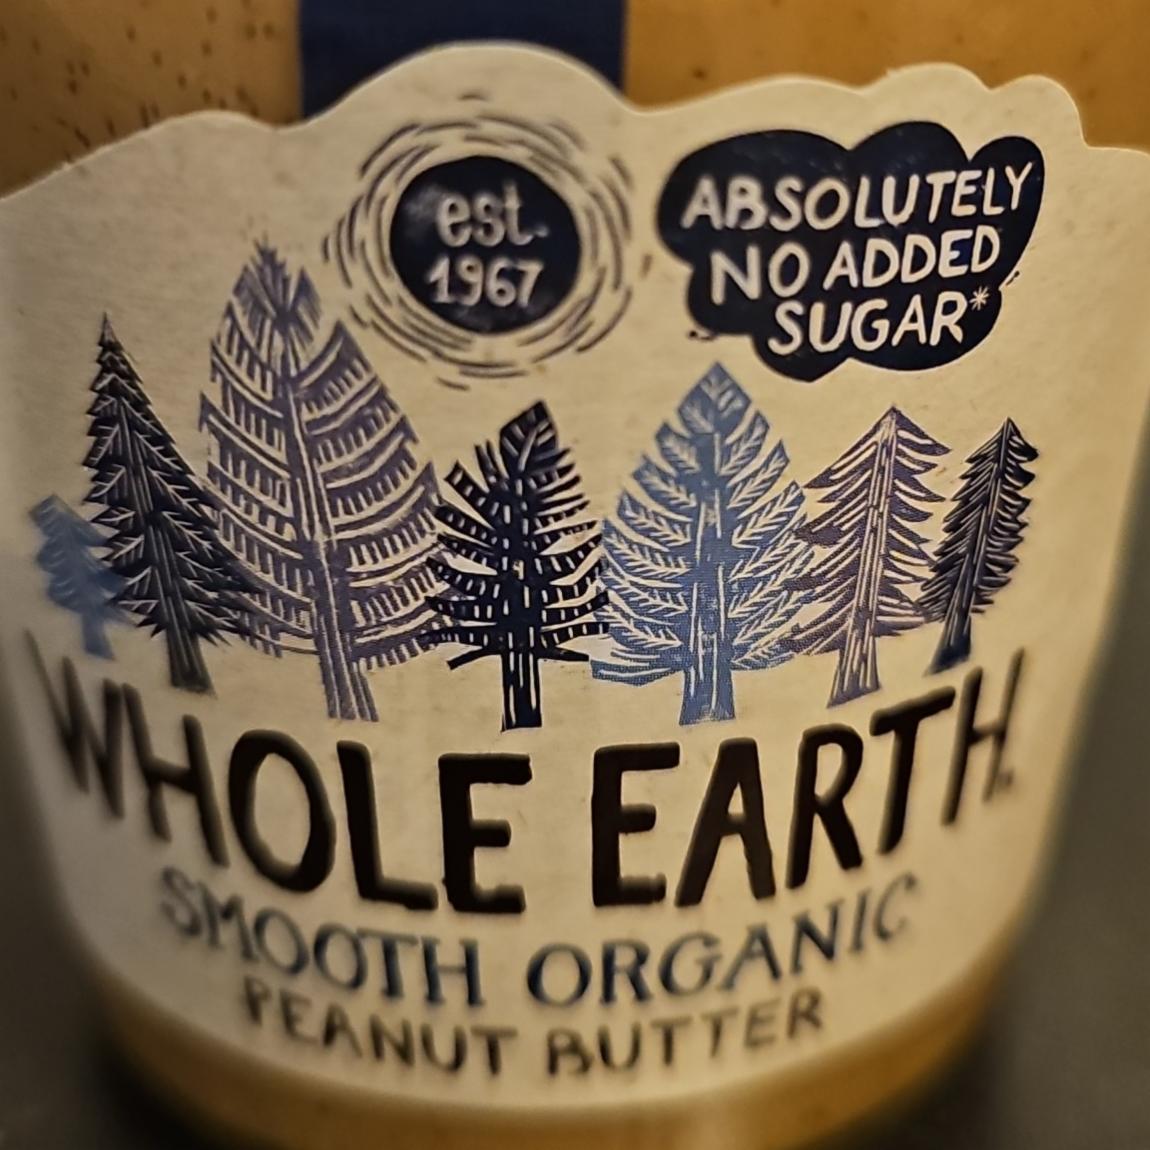 Fotografie - Smooth organic peanut butter Whole Earth